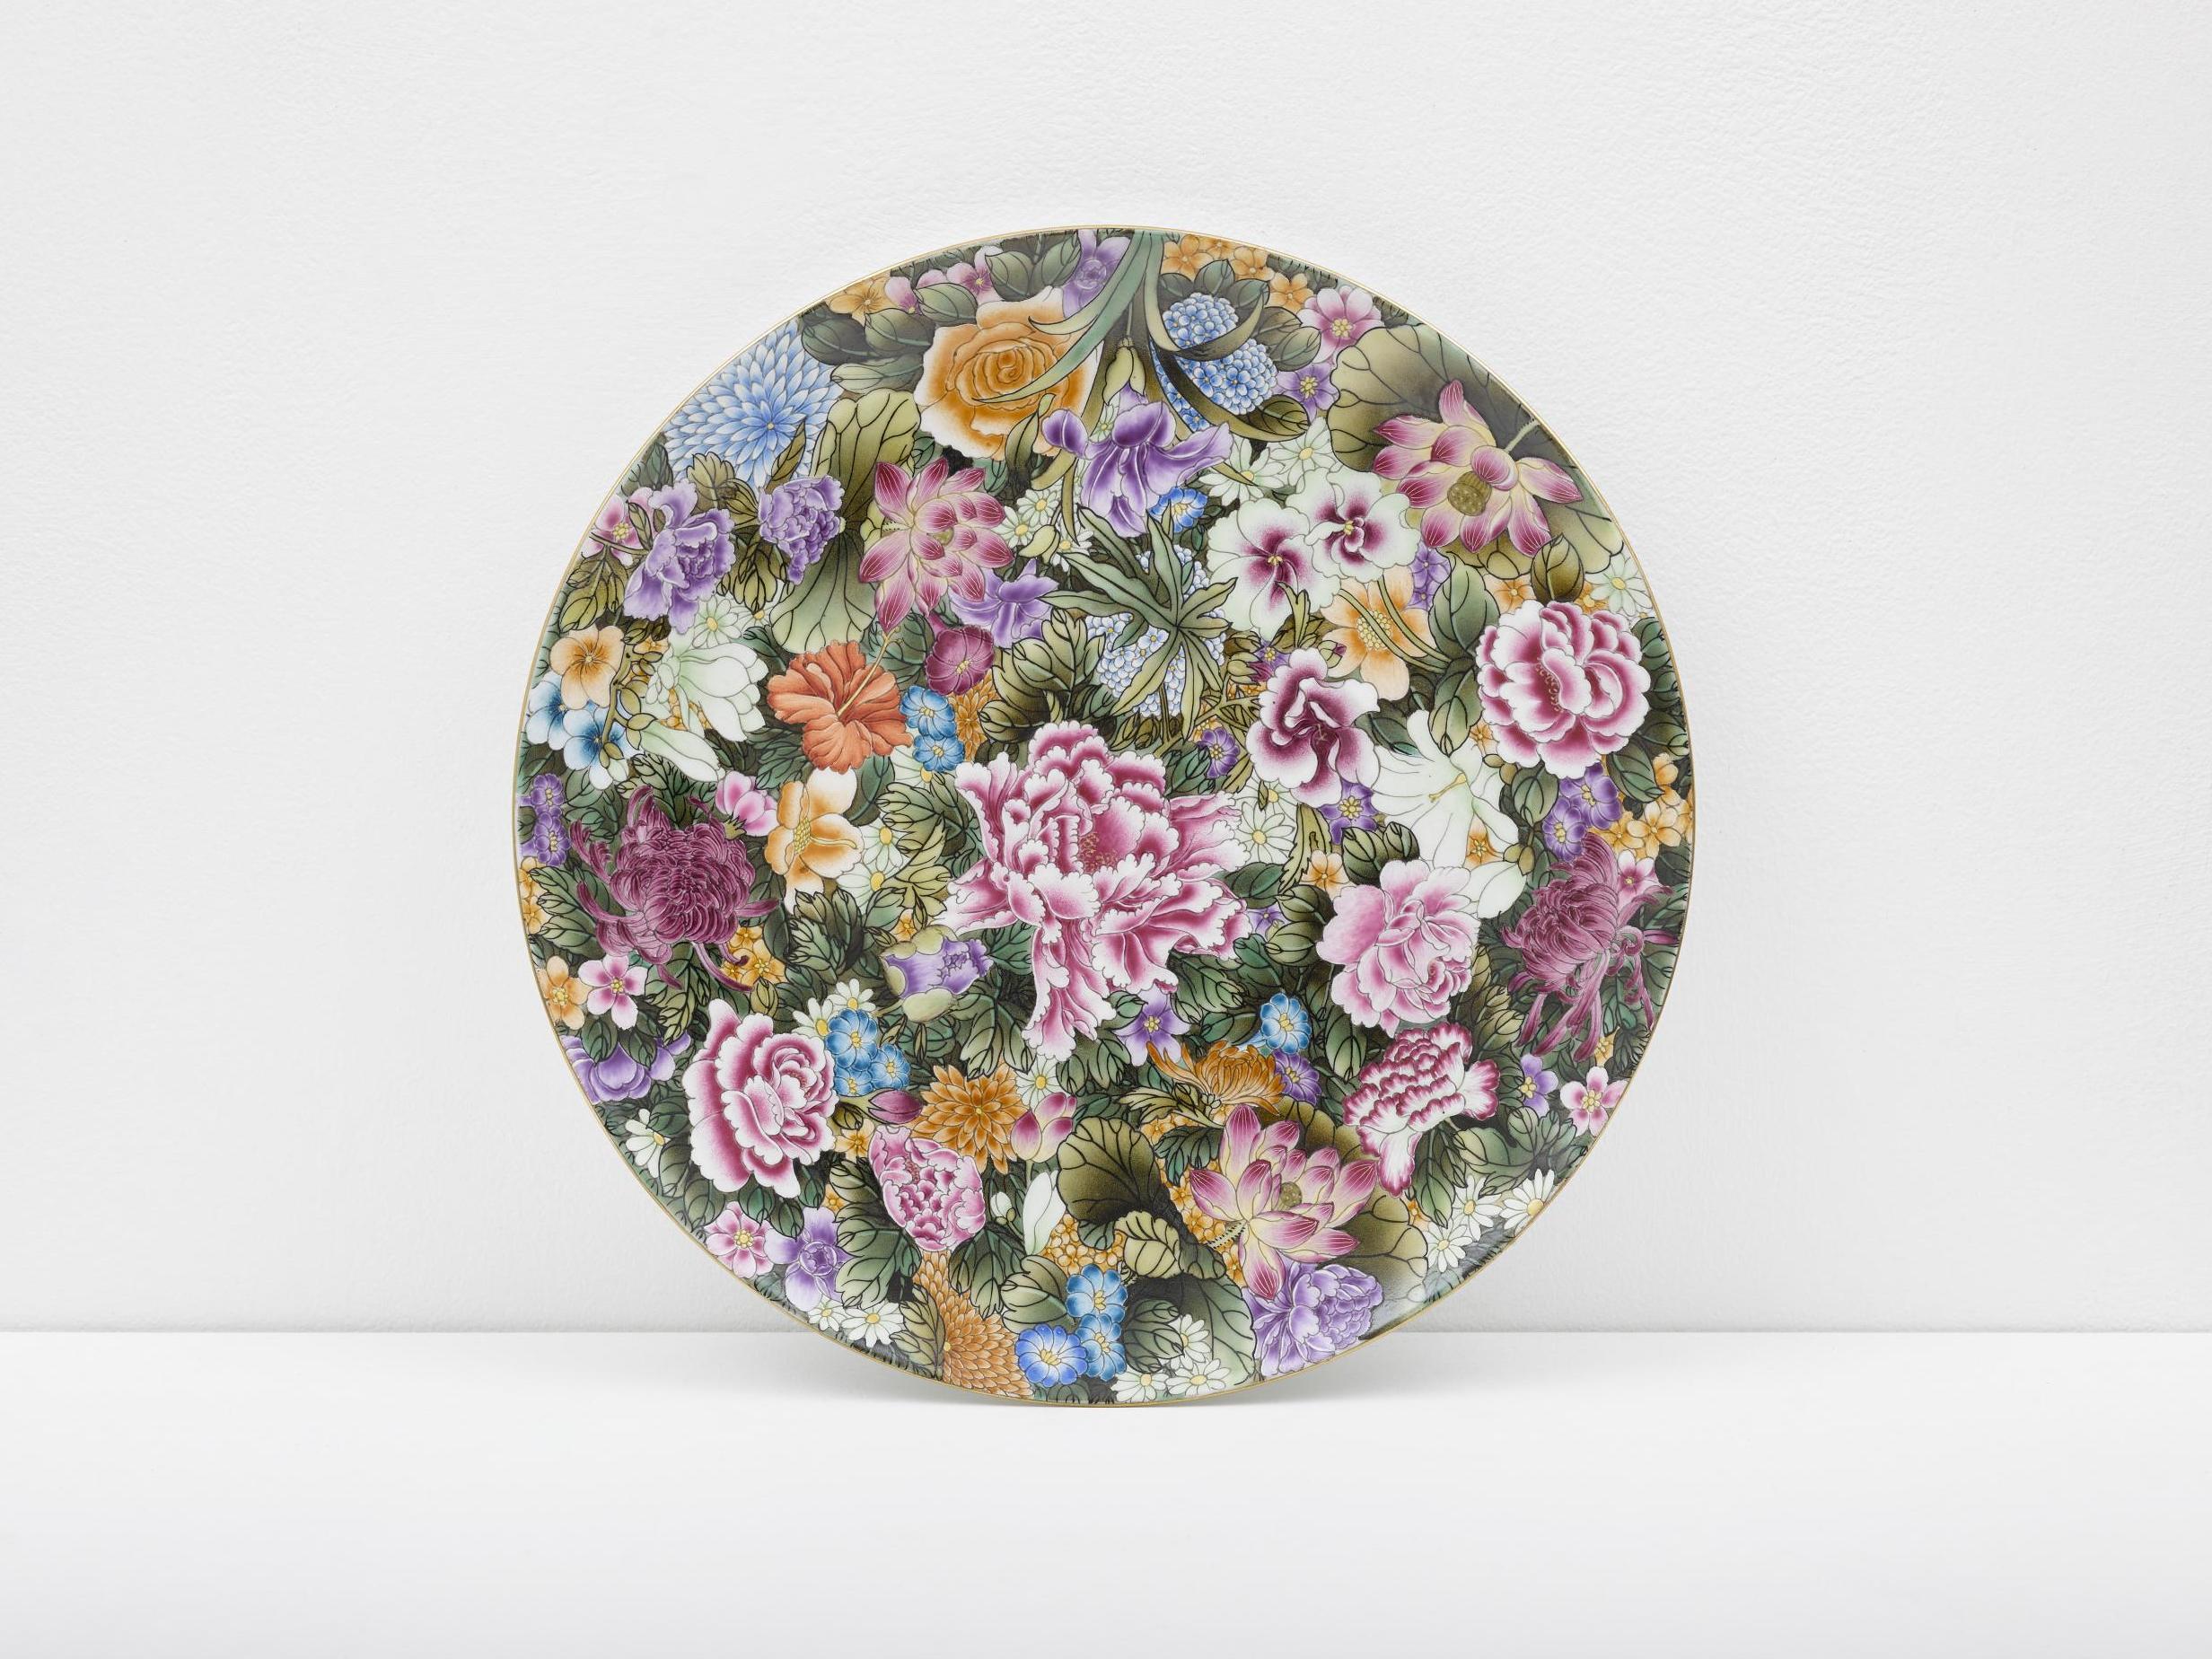 Auction: Ai Weiwei’s ‘Small Plate with Flowers’, 2014, is among campaign auction lots (Ai Weiwei/courtesy of Lisson Galley)